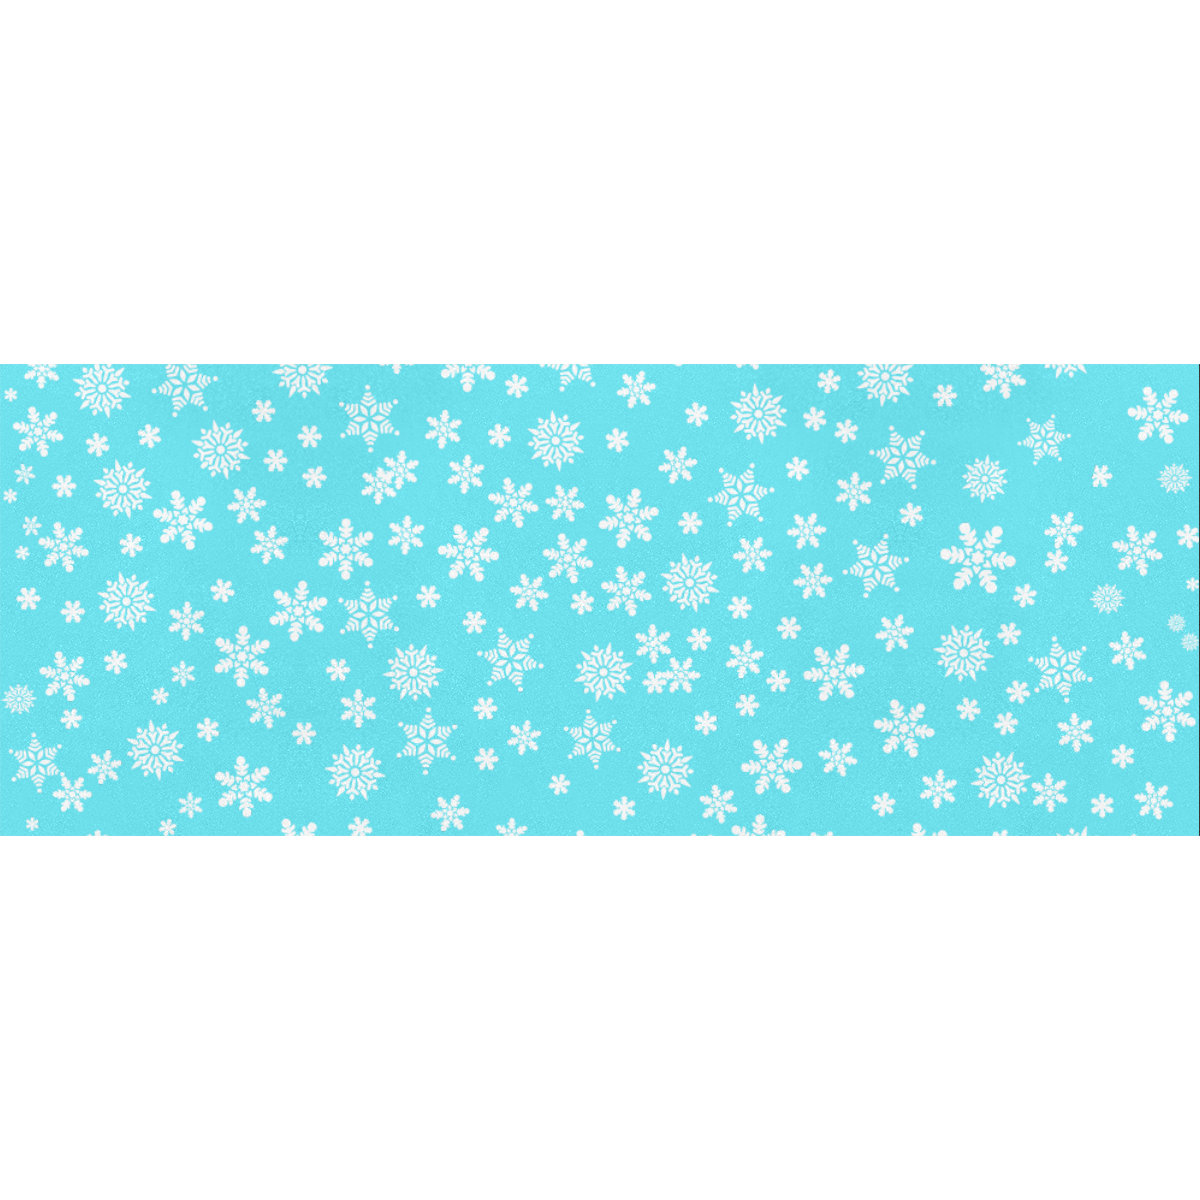 Christmas White Snowflakes on Turquoise Gift Wrapping Paper 58"x 23" (1 Roll)